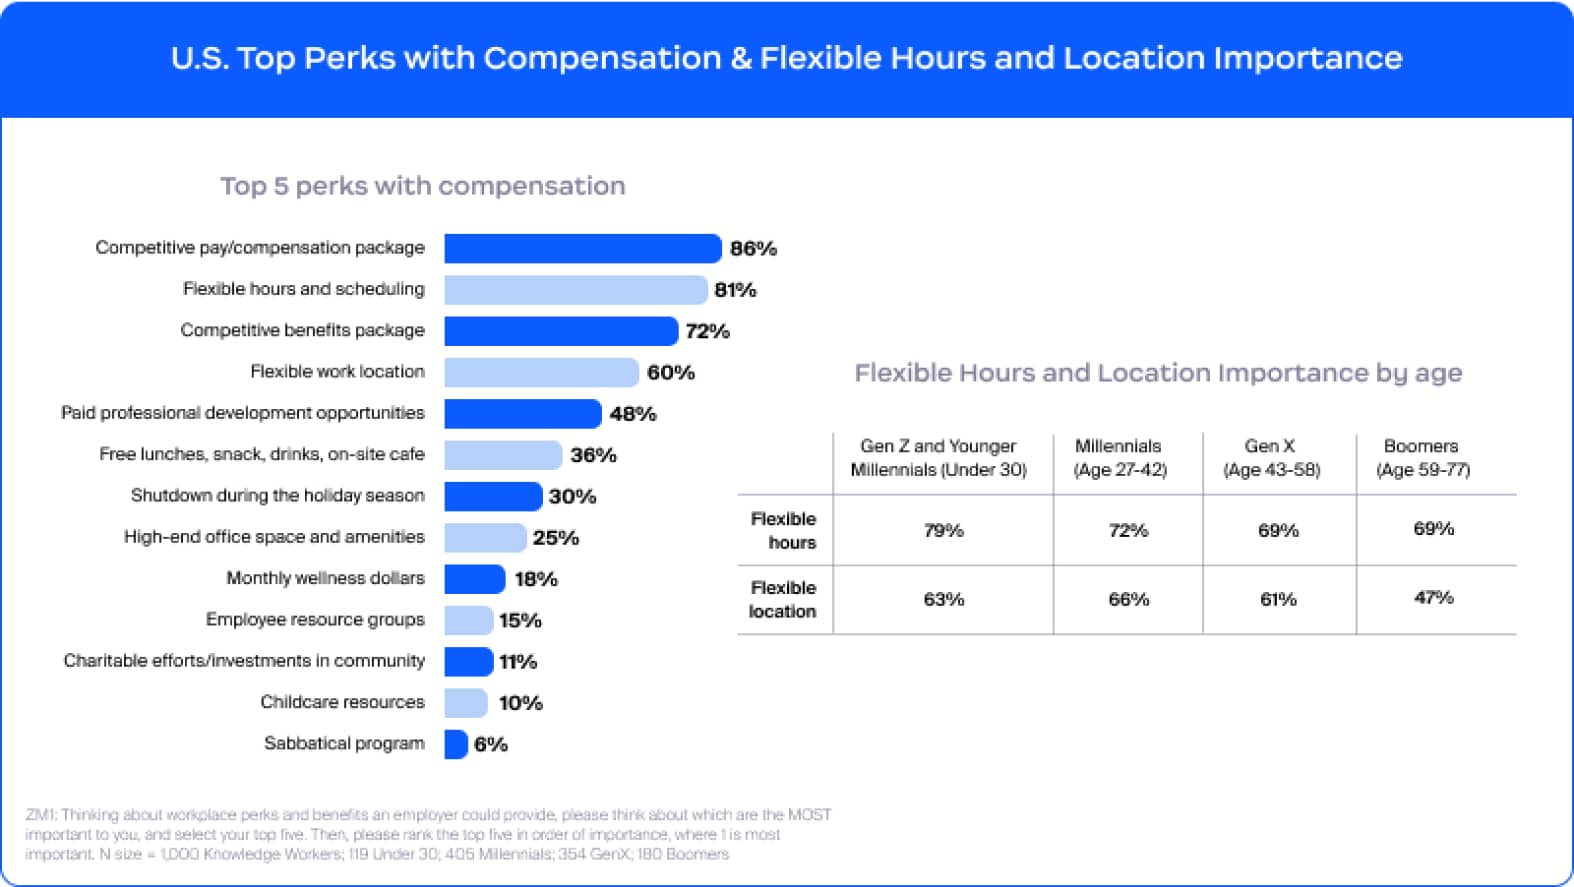 U.S. Top Perks with Compensation & Flexible Hours and Location Importance